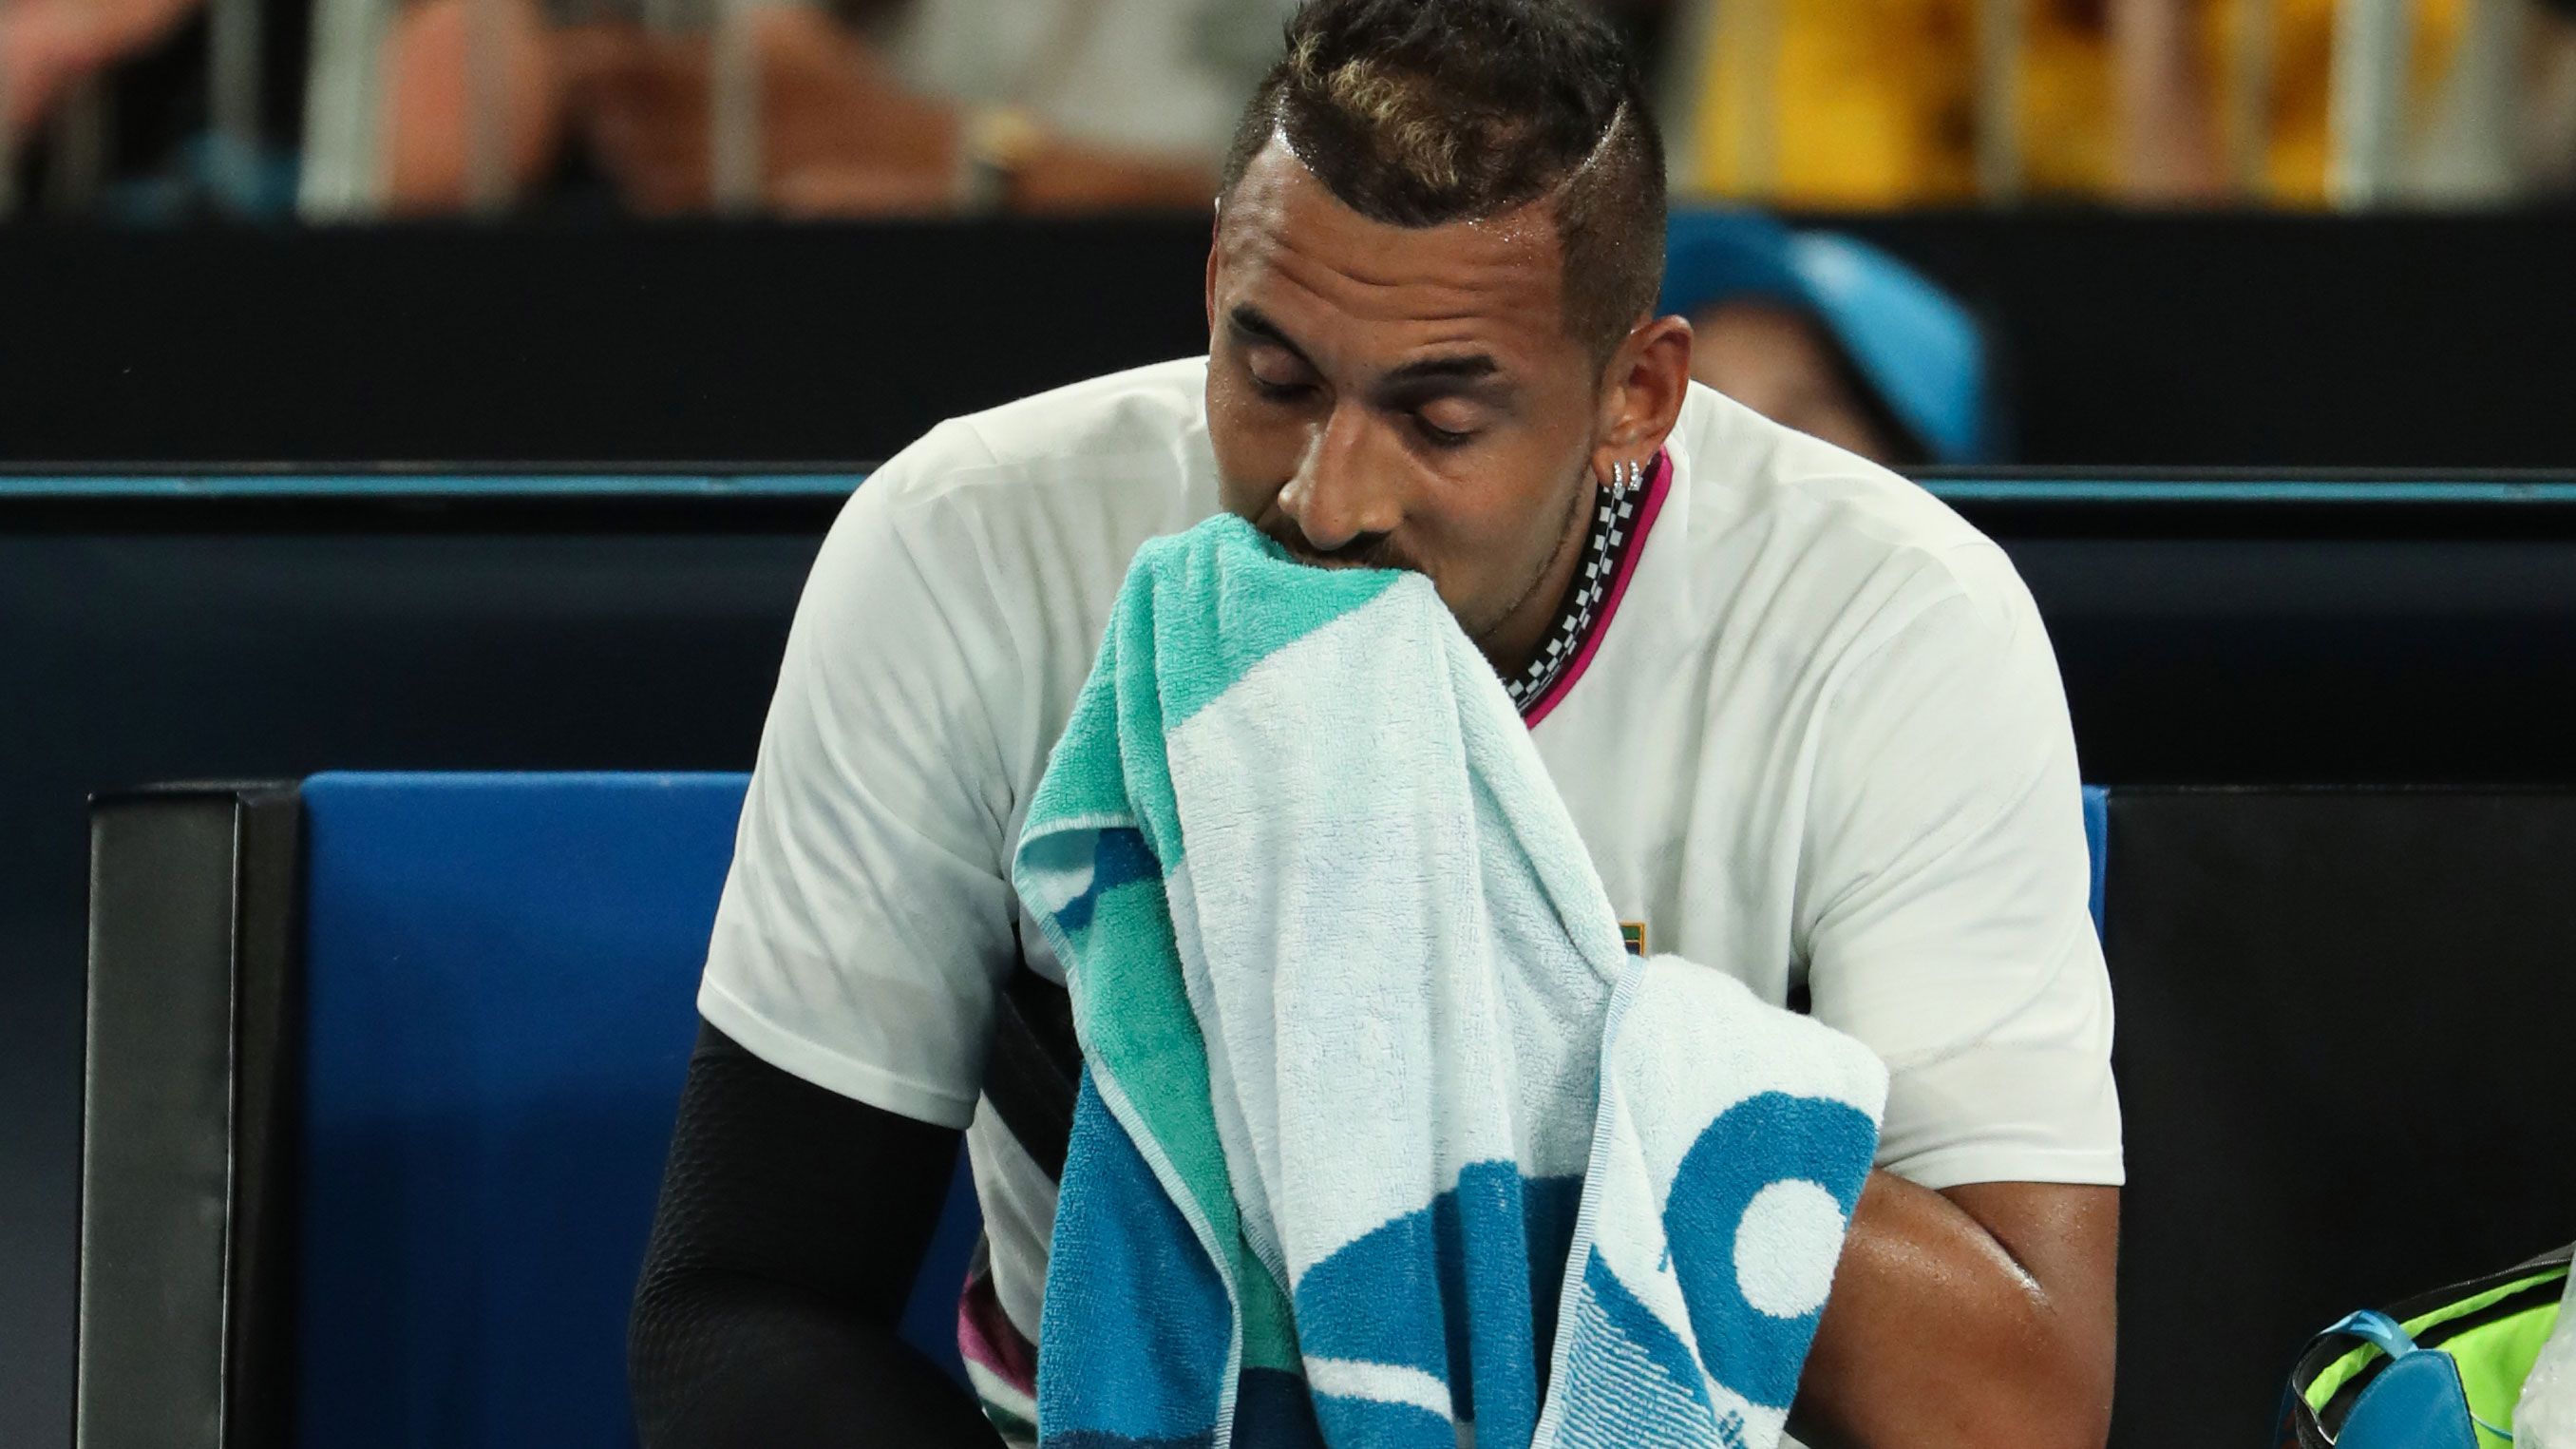 Nick Kyrgios proves again that showtime comes before results in Australian Open loss